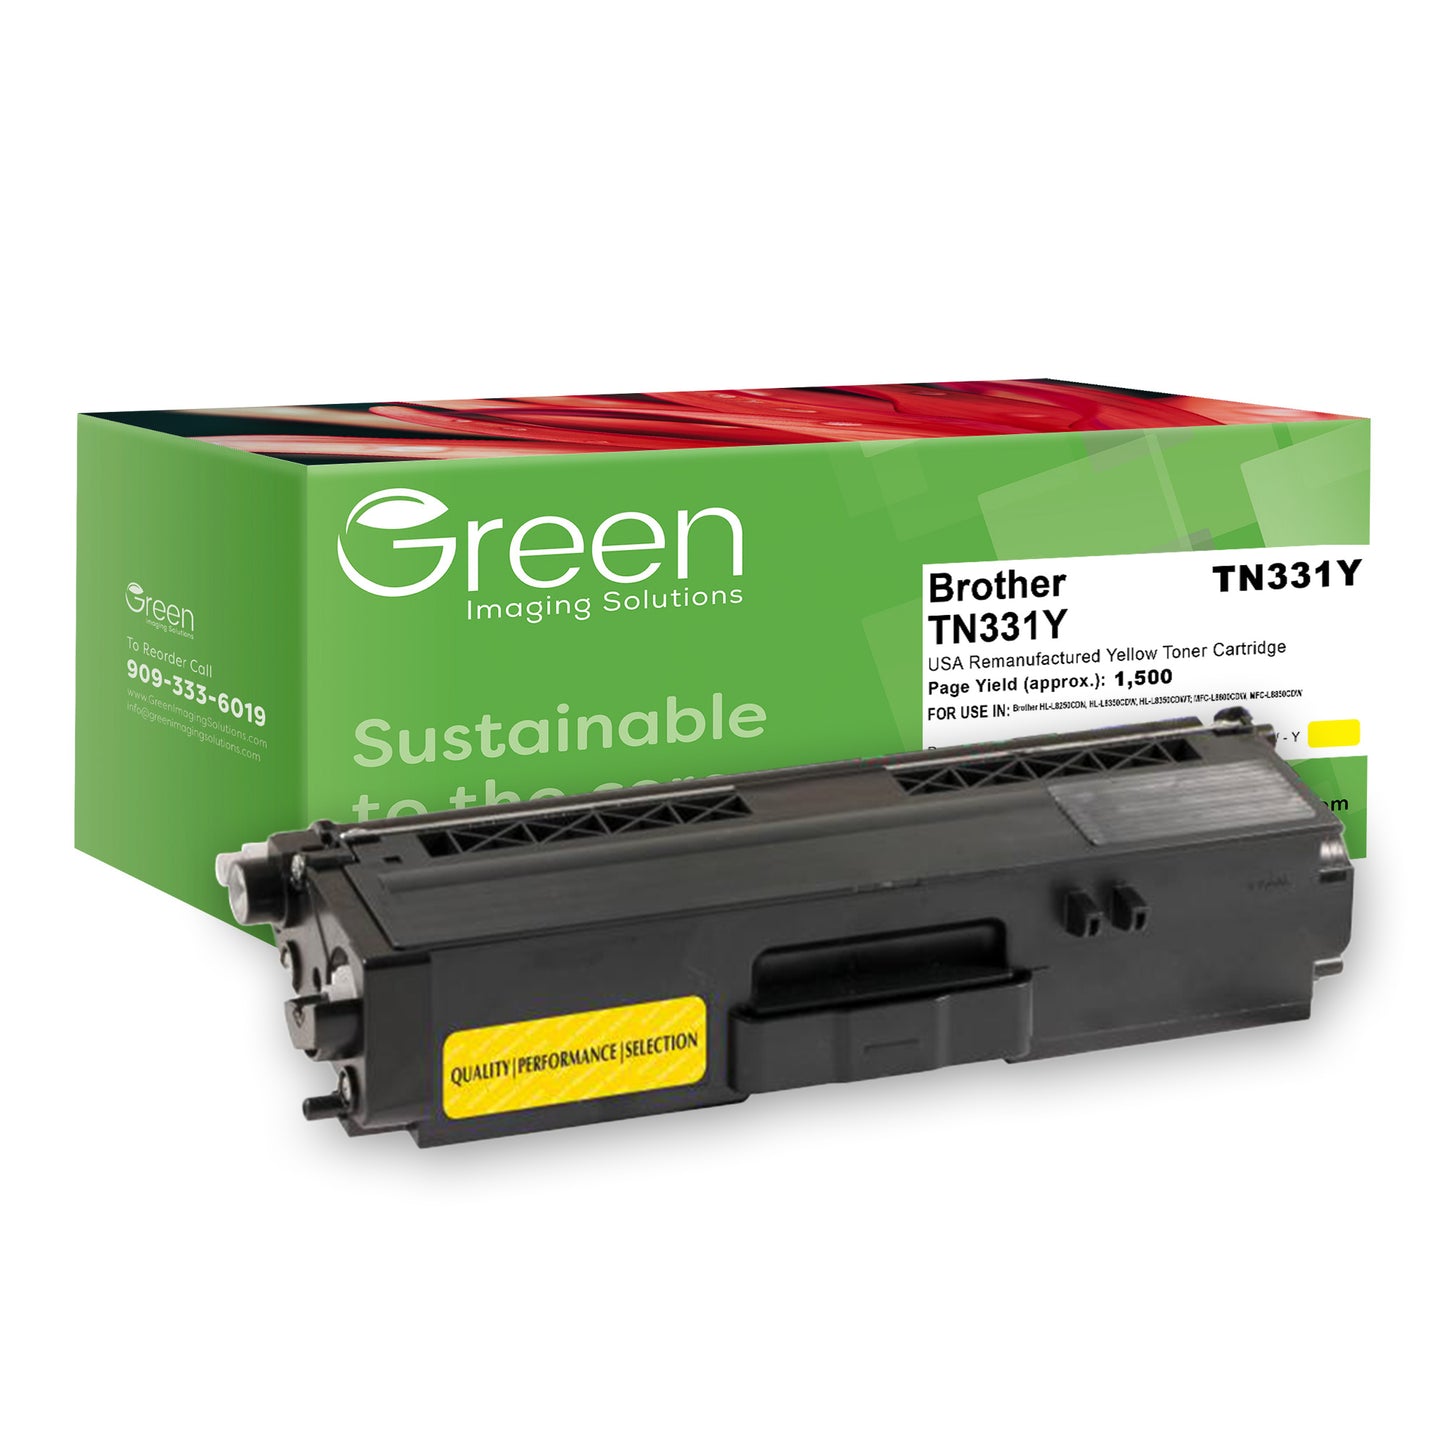 Green Imaging Solutions USA Remanufactured Yellow Toner Cartridge for Brother TN331